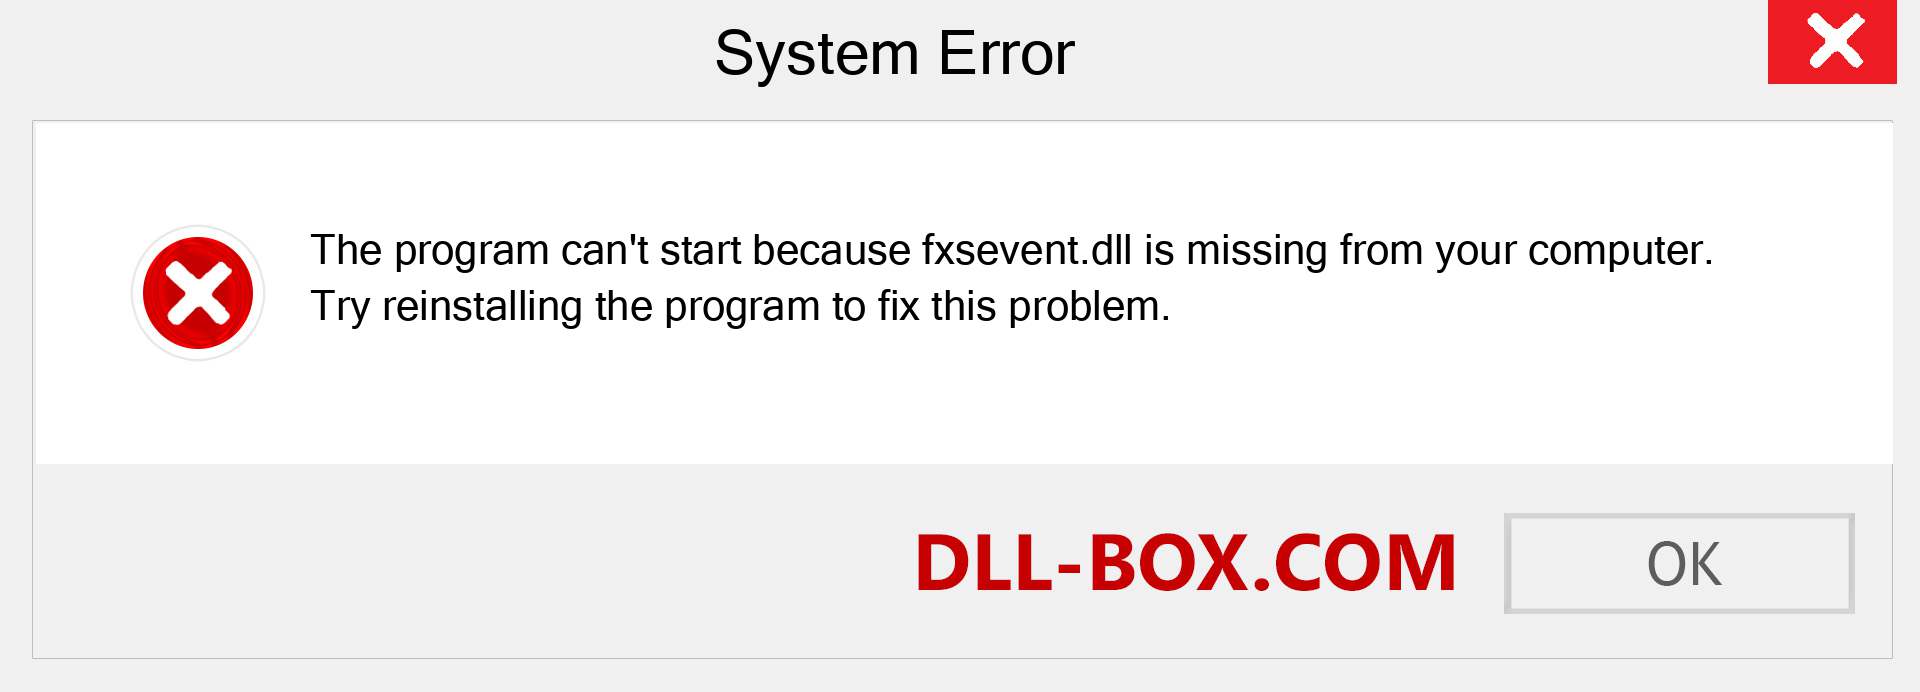  fxsevent.dll file is missing?. Download for Windows 7, 8, 10 - Fix  fxsevent dll Missing Error on Windows, photos, images